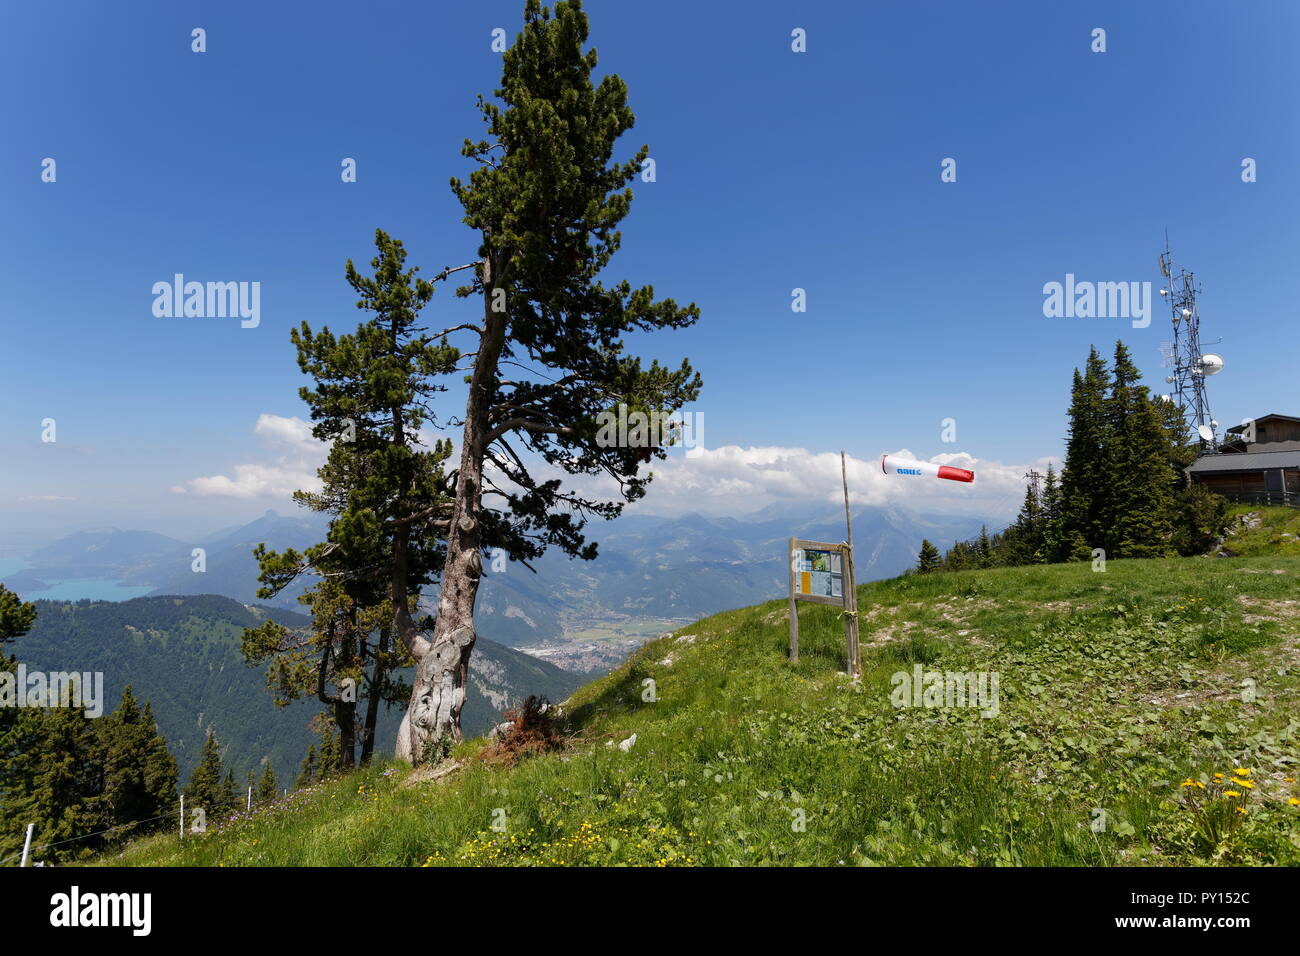 View from the top chairlift station with a wind sock and a distant view of Lake Annecy La Sambuy mountain area near Faverges France Stock Photo